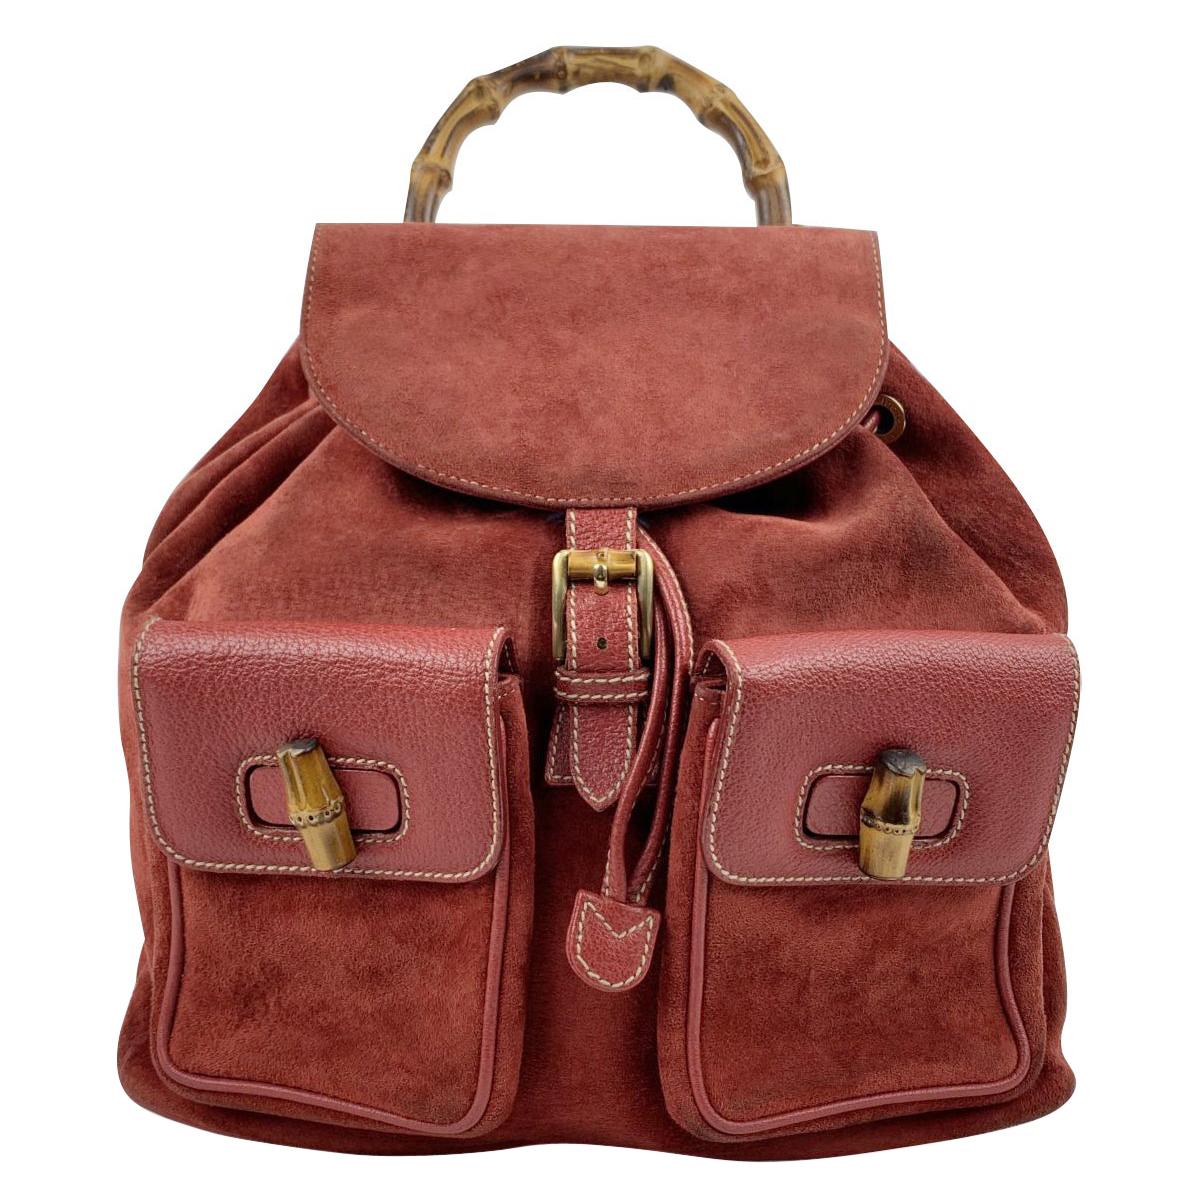 Gucci Vintage Red Suede and Leather Bamboo Backpack Shoulder Bag